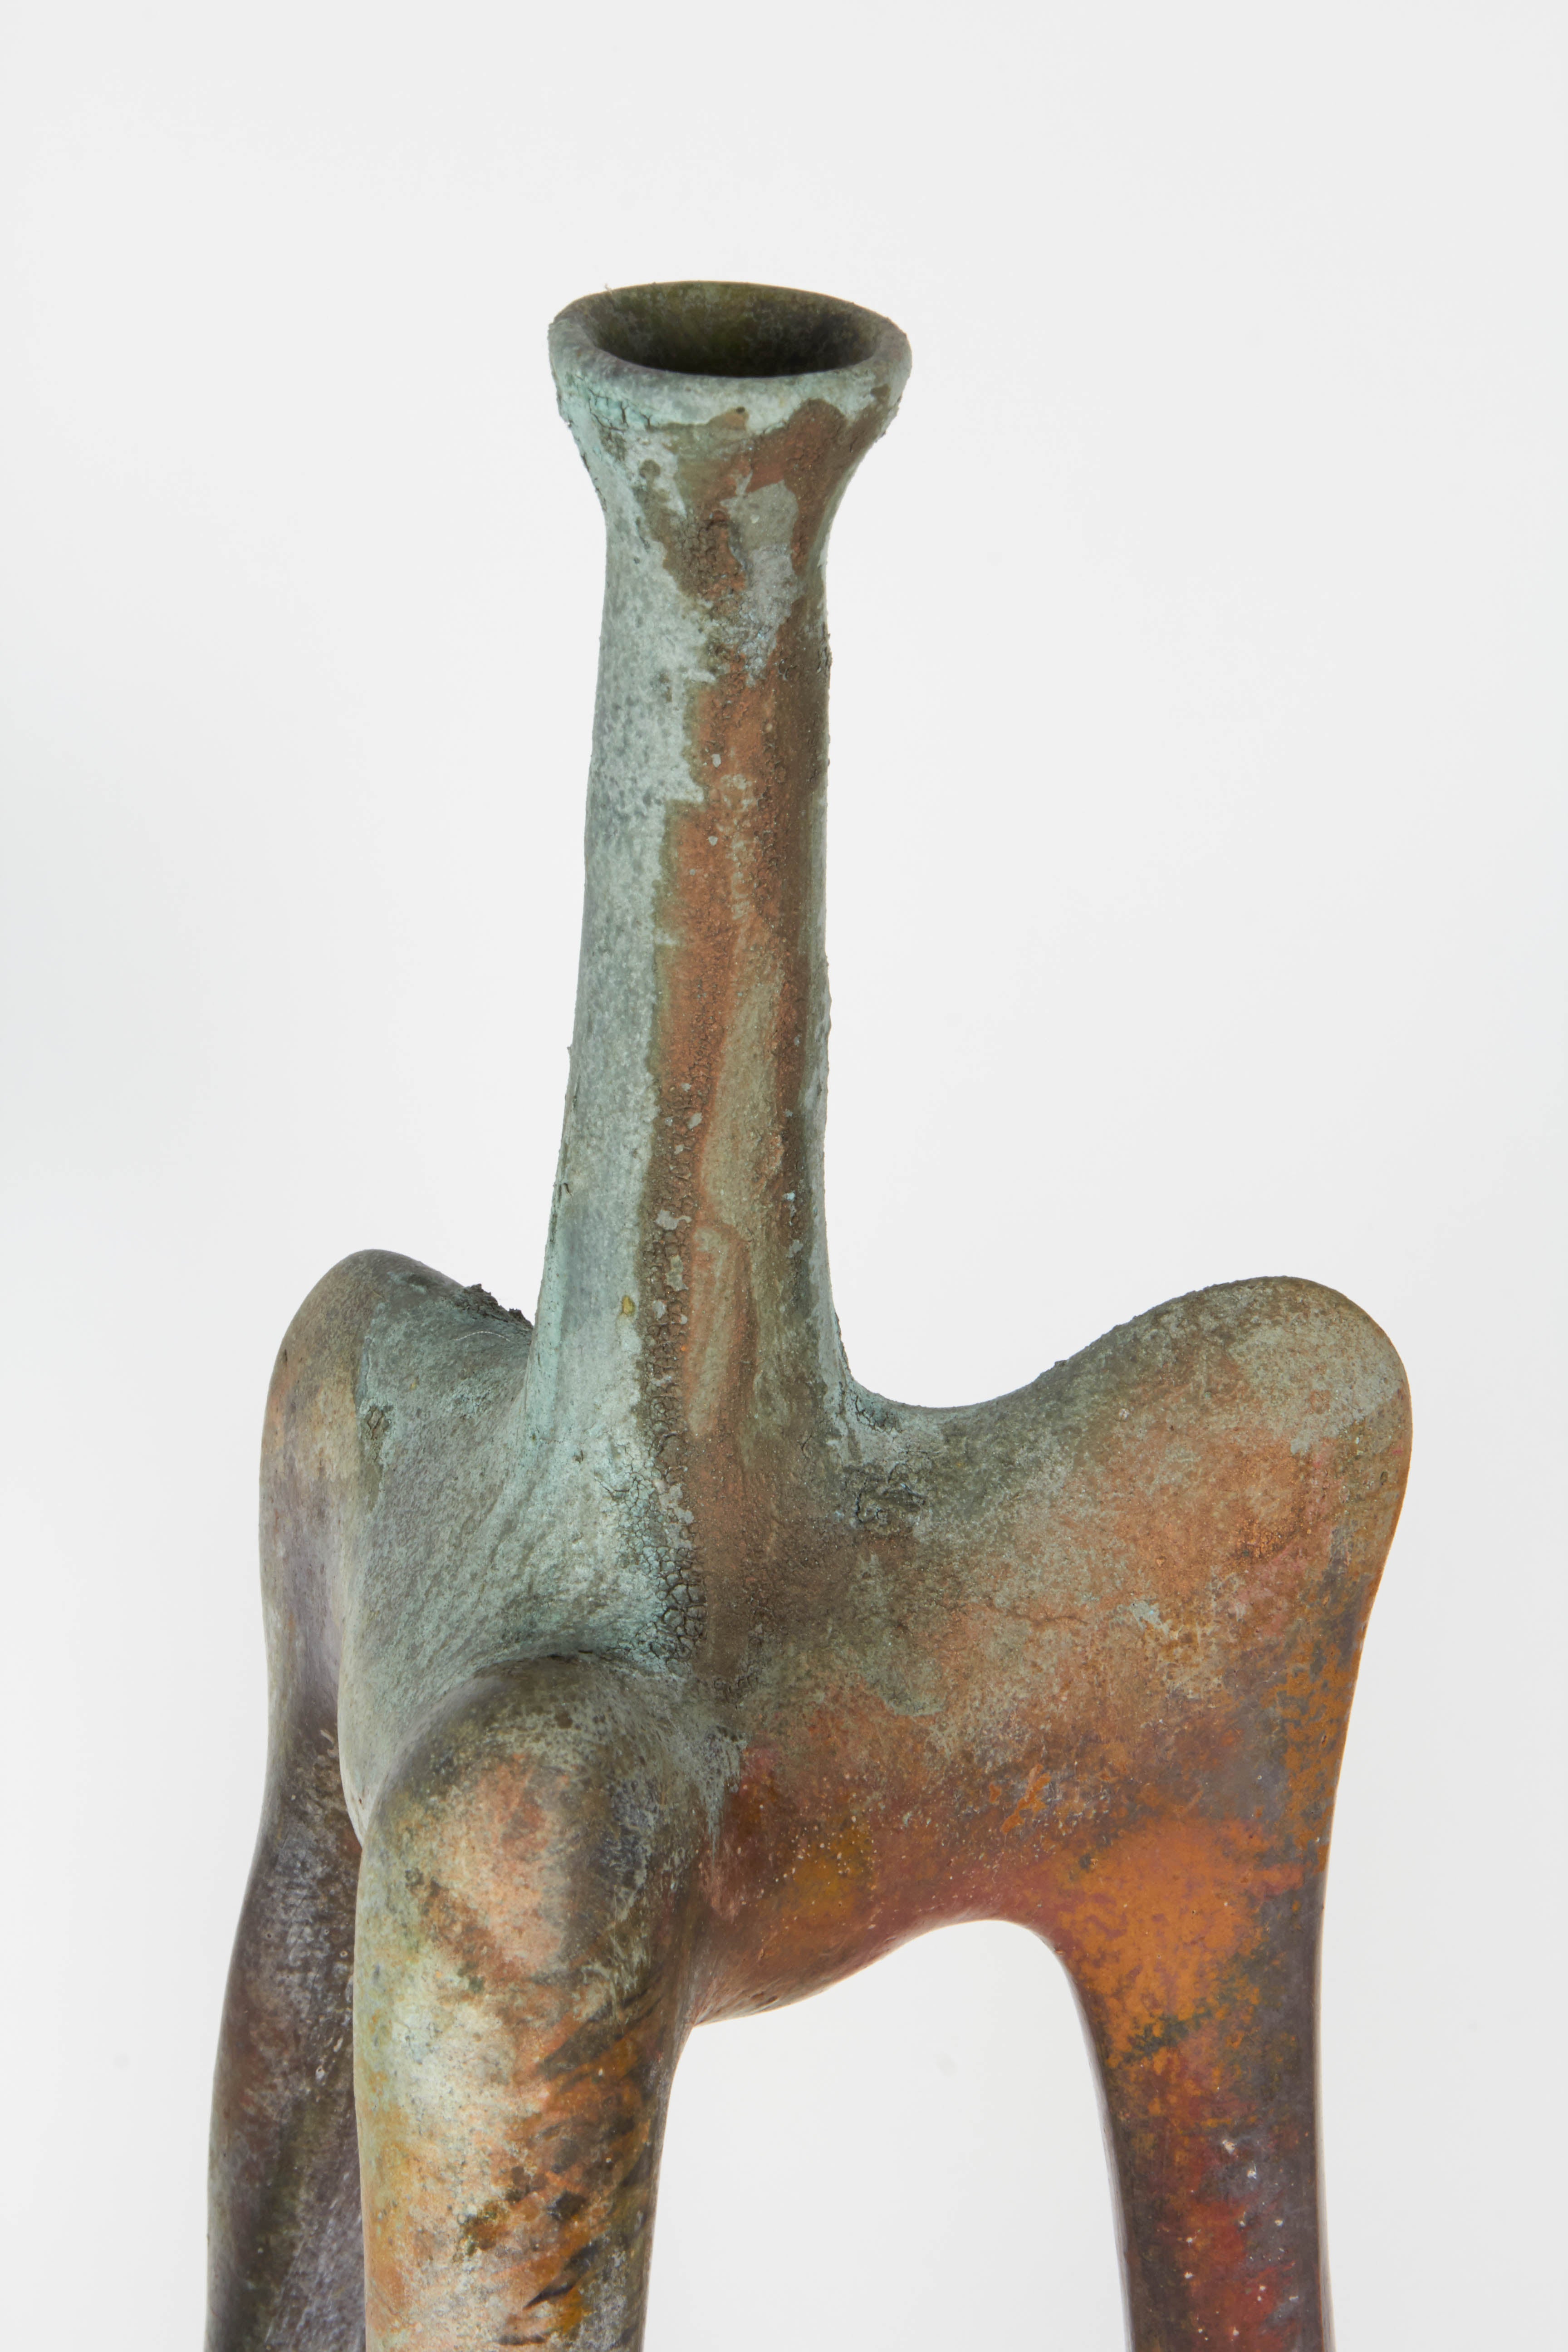 20th Century Richard Hirsch Ceramic Vessel and Stand, Tripod Vessels Collection, 1987 - 1994 For Sale